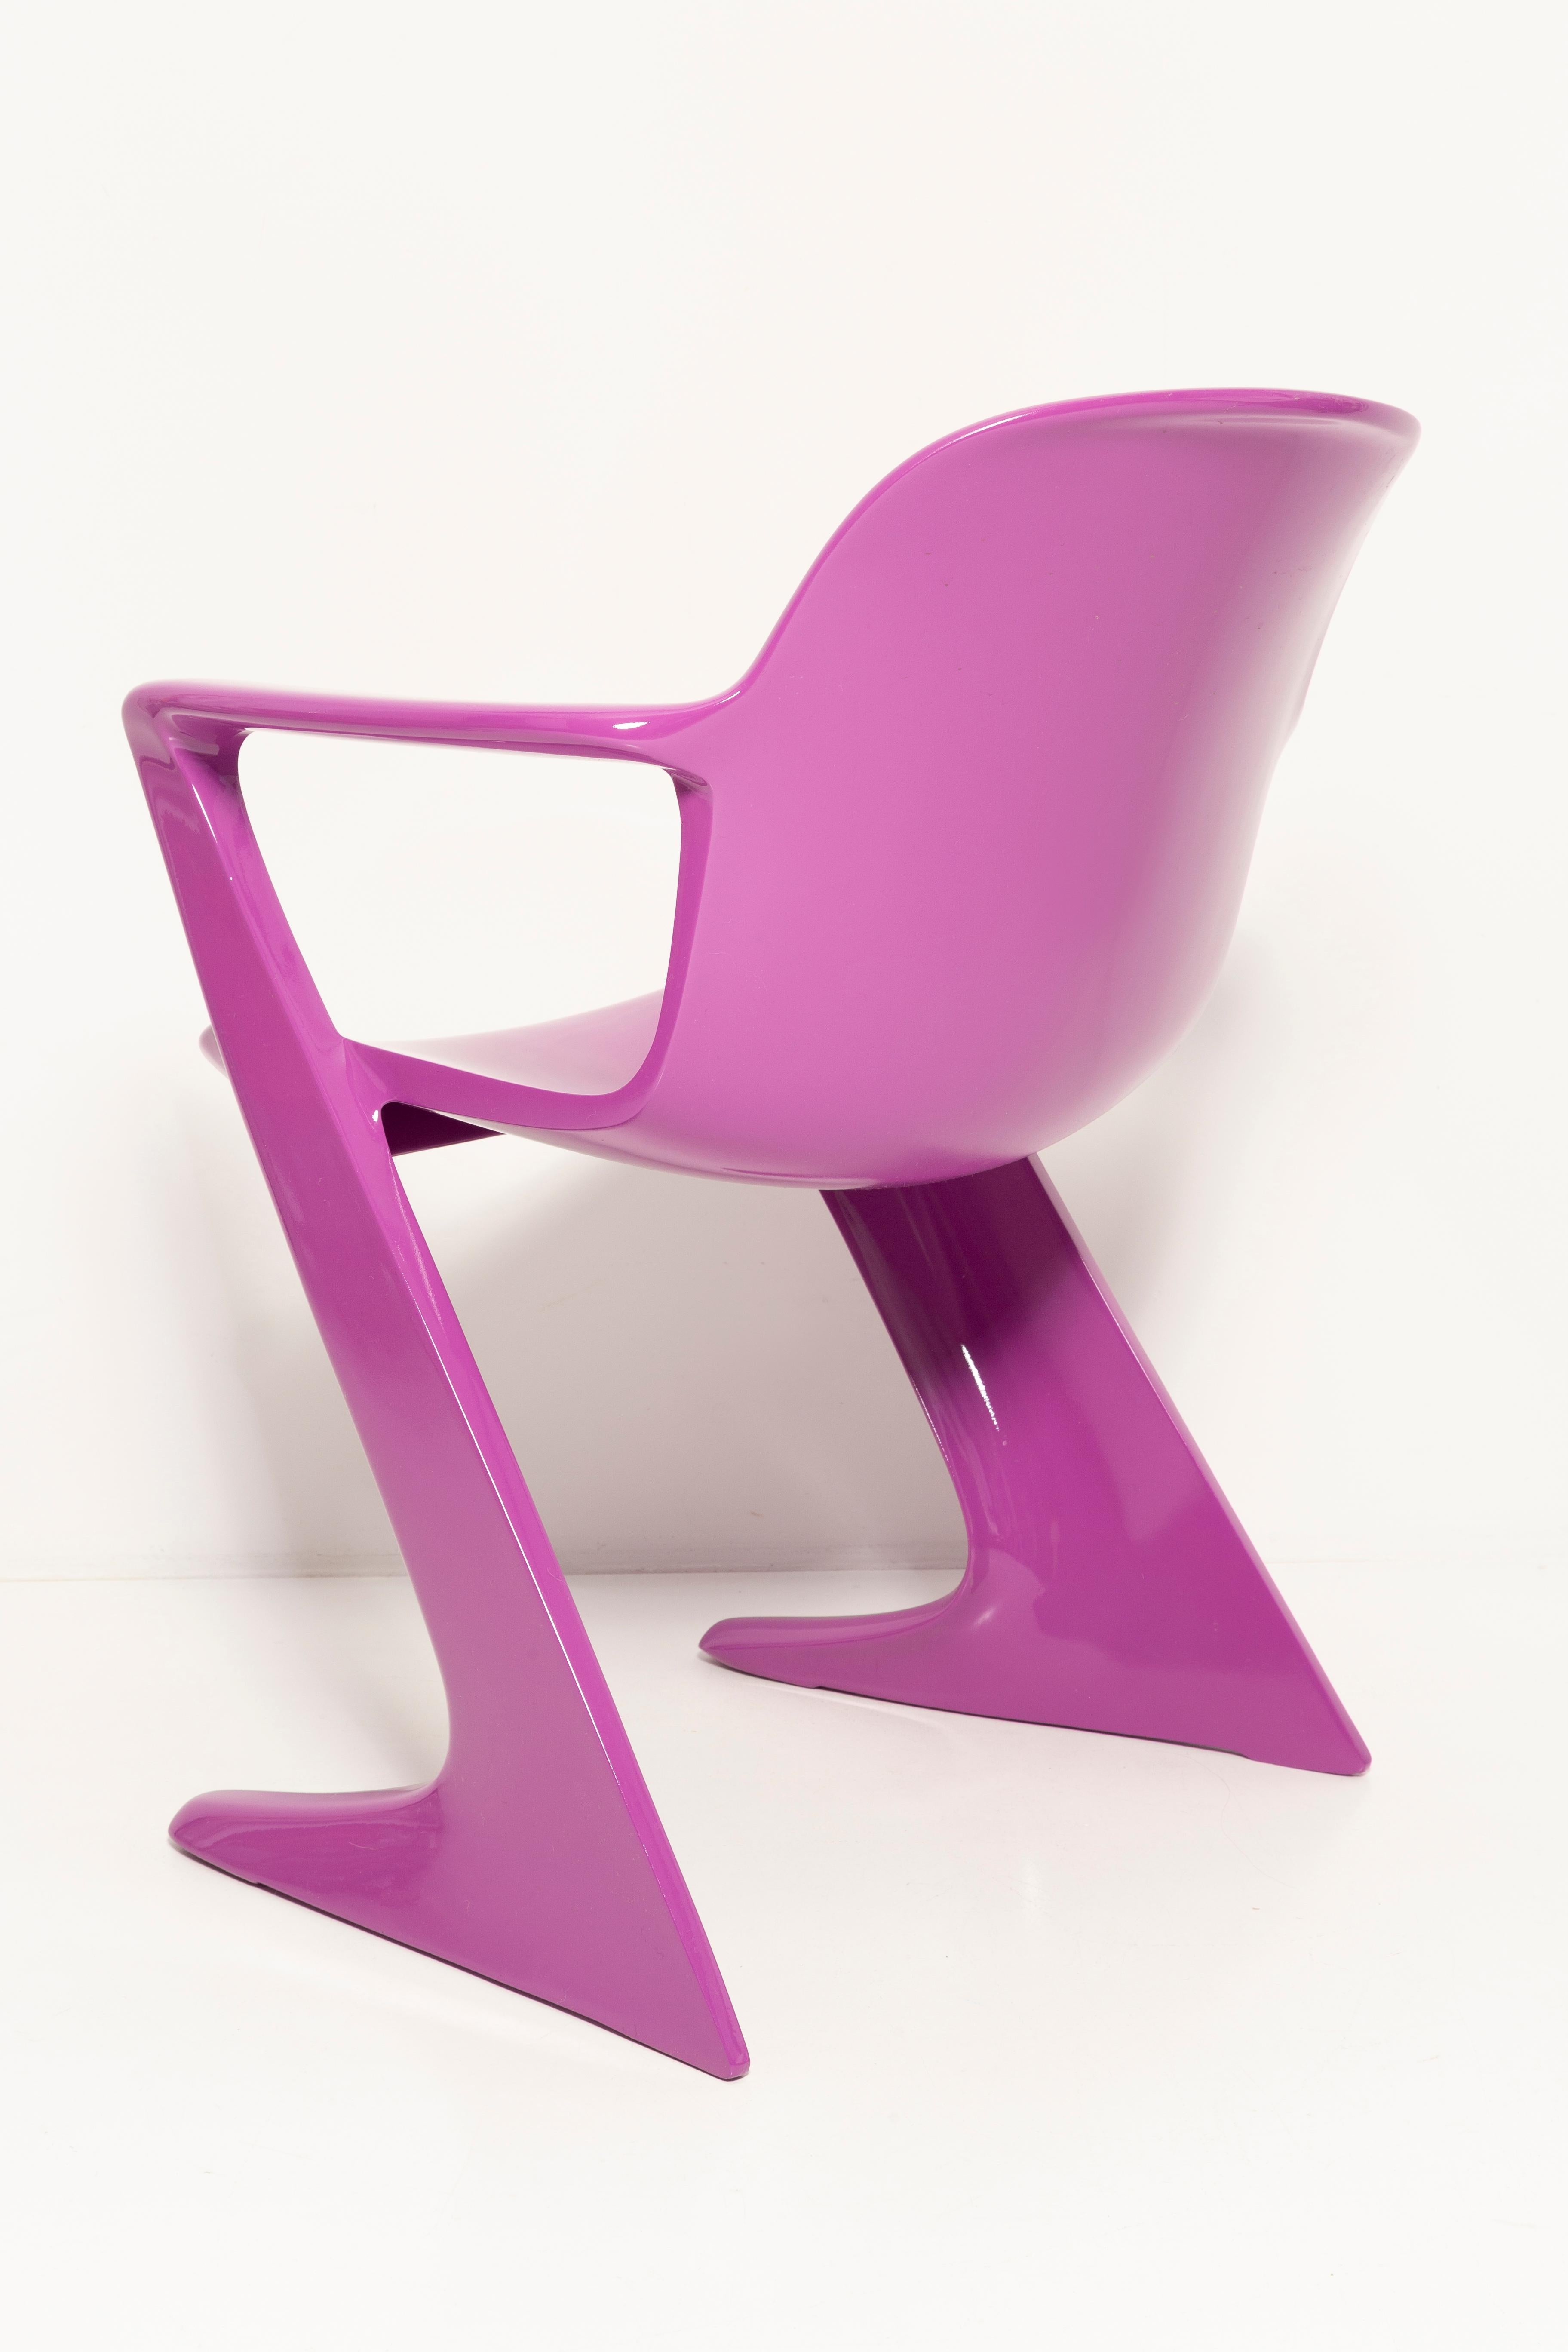 Mid-Century Violet Purple Kangaroo Chair Designed by Ernst Moeckl, Germany, 1968 For Sale 2